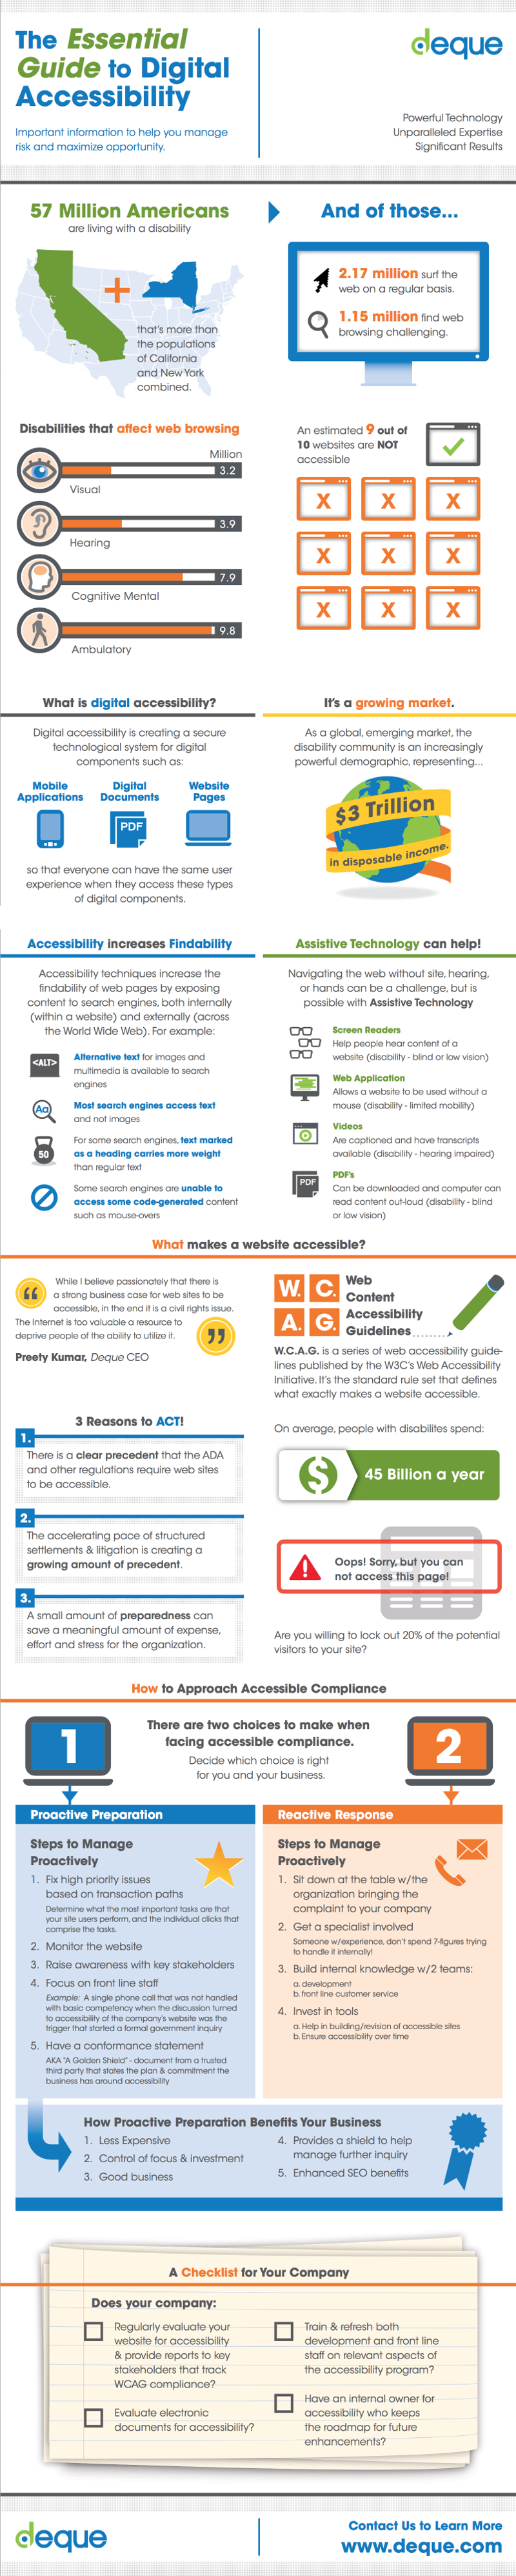 Deque's Essential Guide to Digital Accessibility Infographic. See the accessible HTML version below.